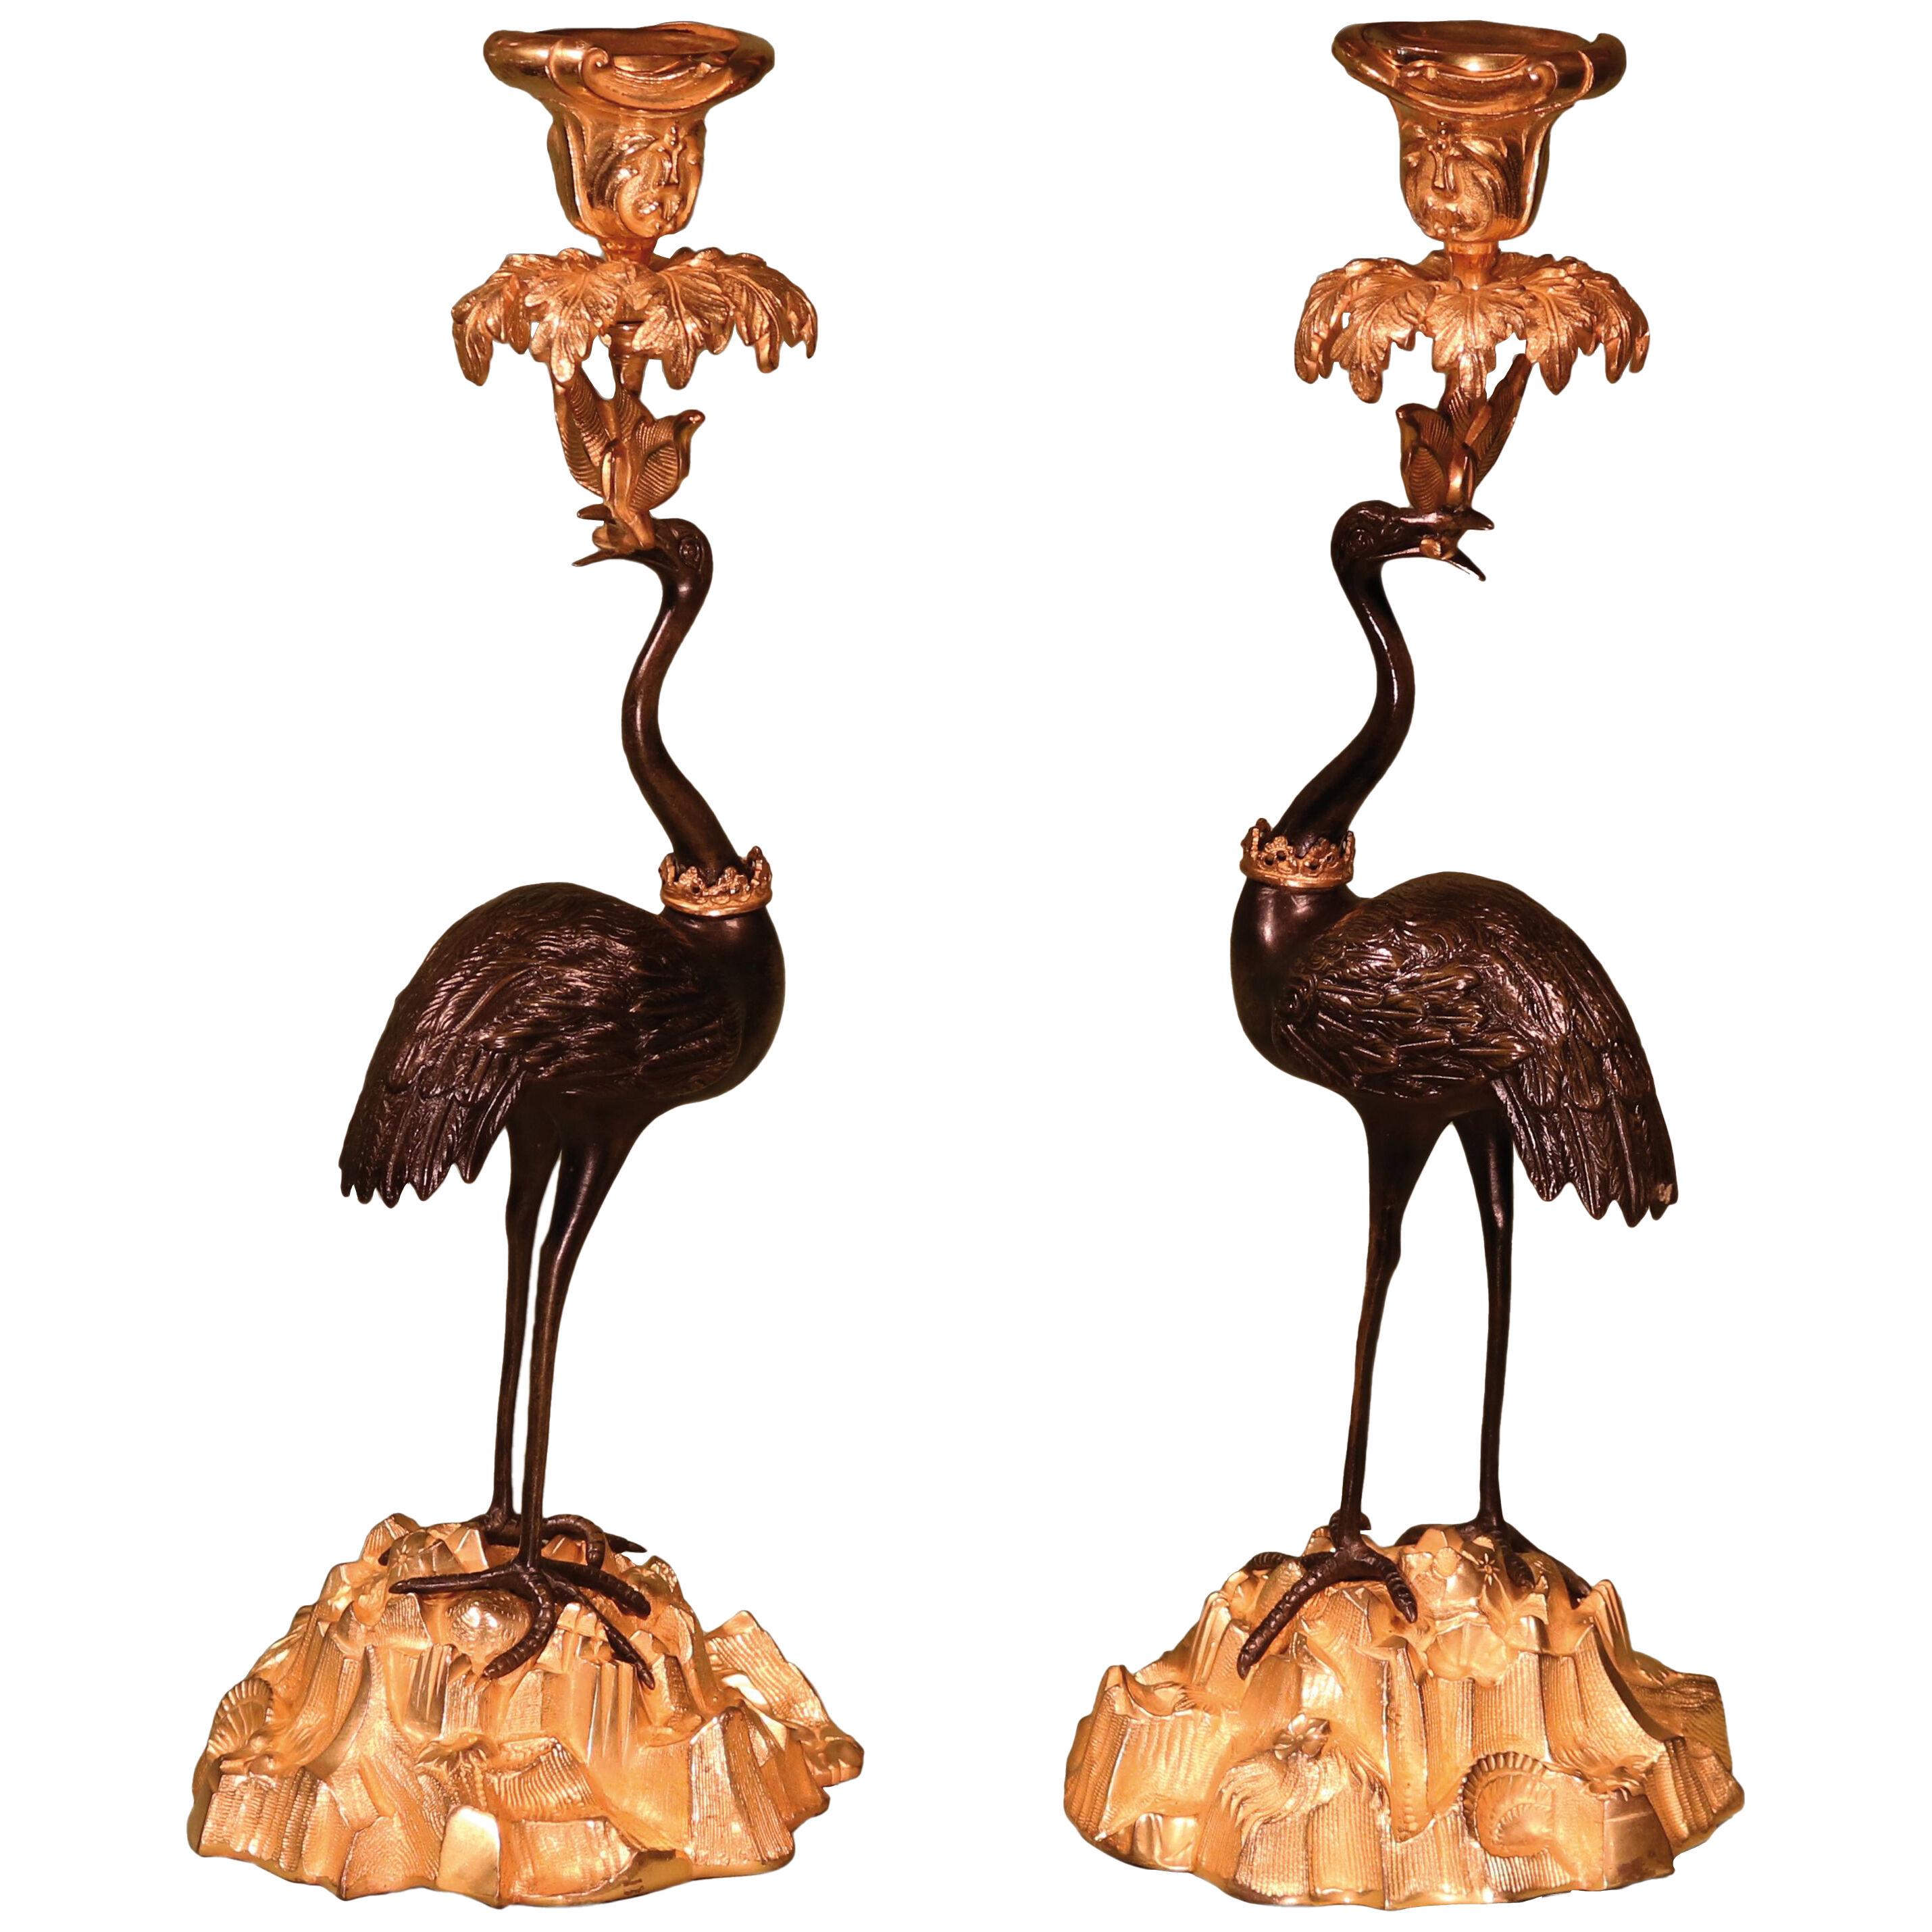 A pair of mid 19th century bronze and ormolu candlestick storks by Abbott